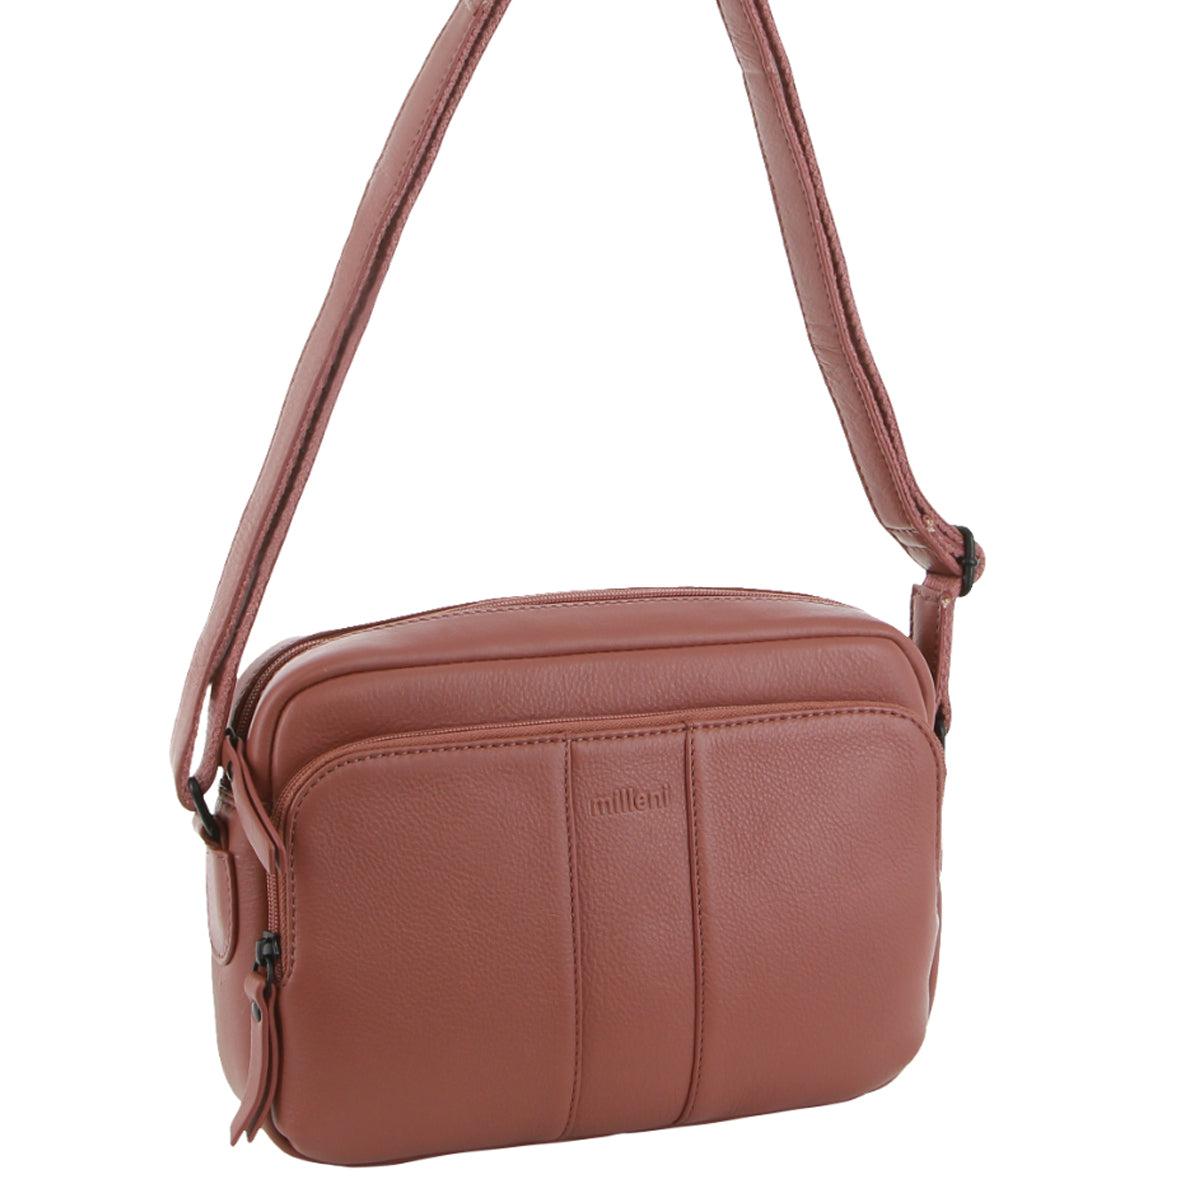 Milleni - NL3871 Small leather sidebag - Rose - 0